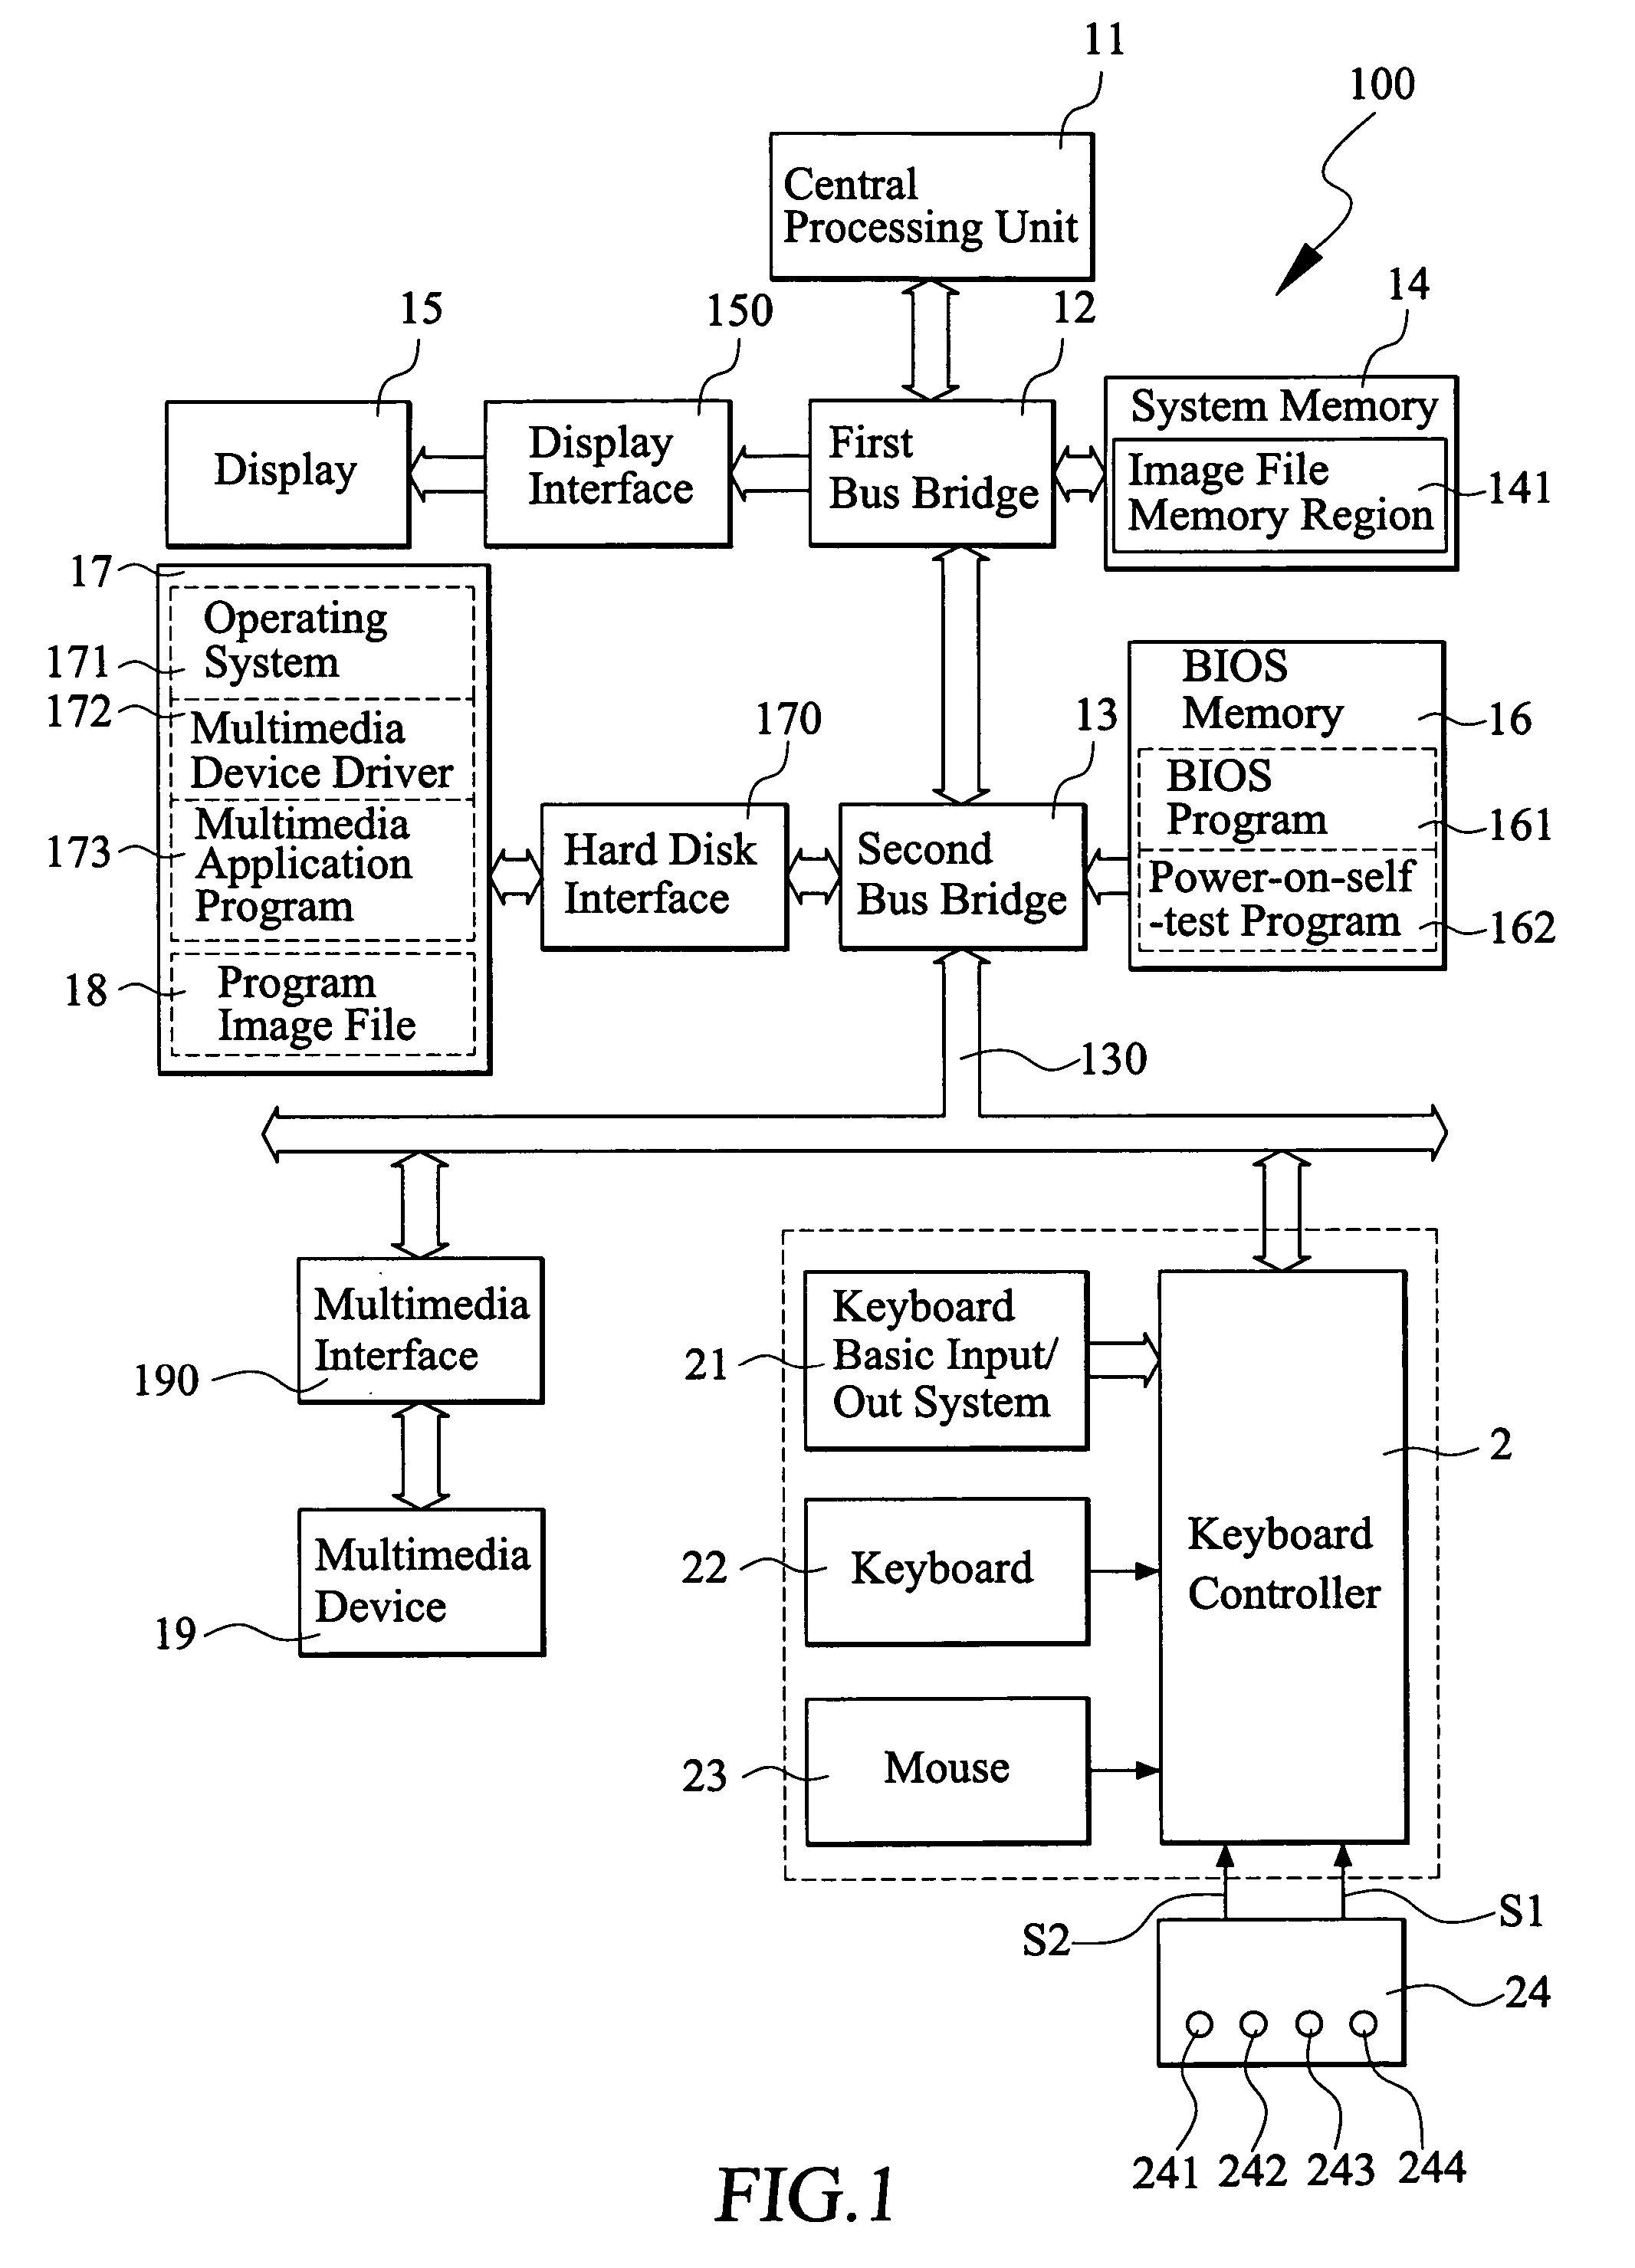 Method for executing computer function options with intelligent memory for computer-based multimedia system